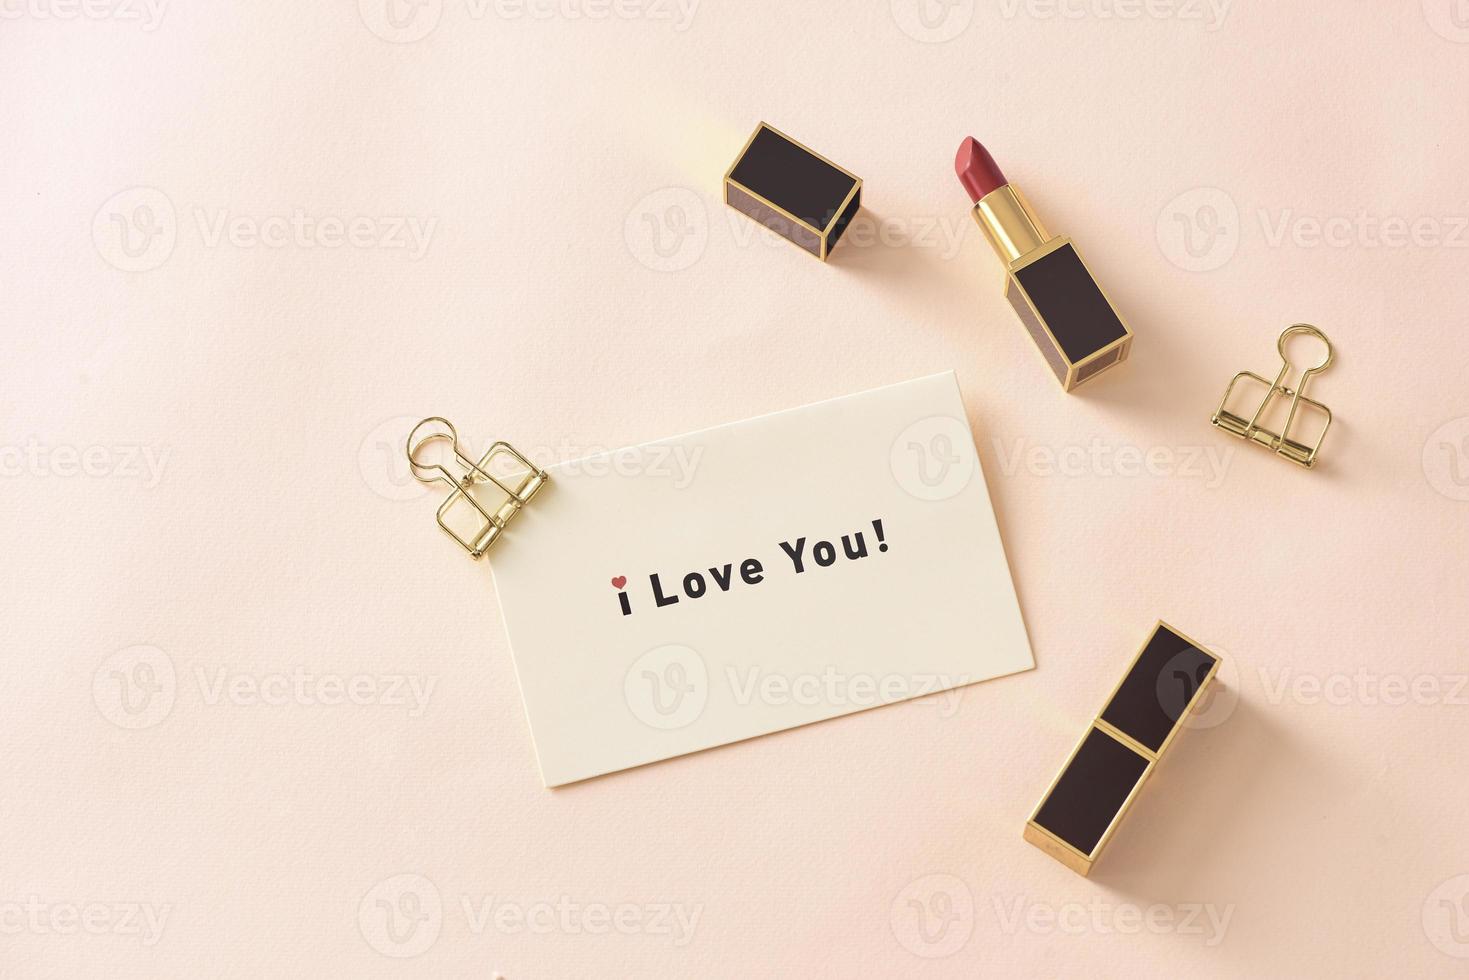 Happy Valentine's Day concept. Beautiful luxury modern high end red bold lipstick photo